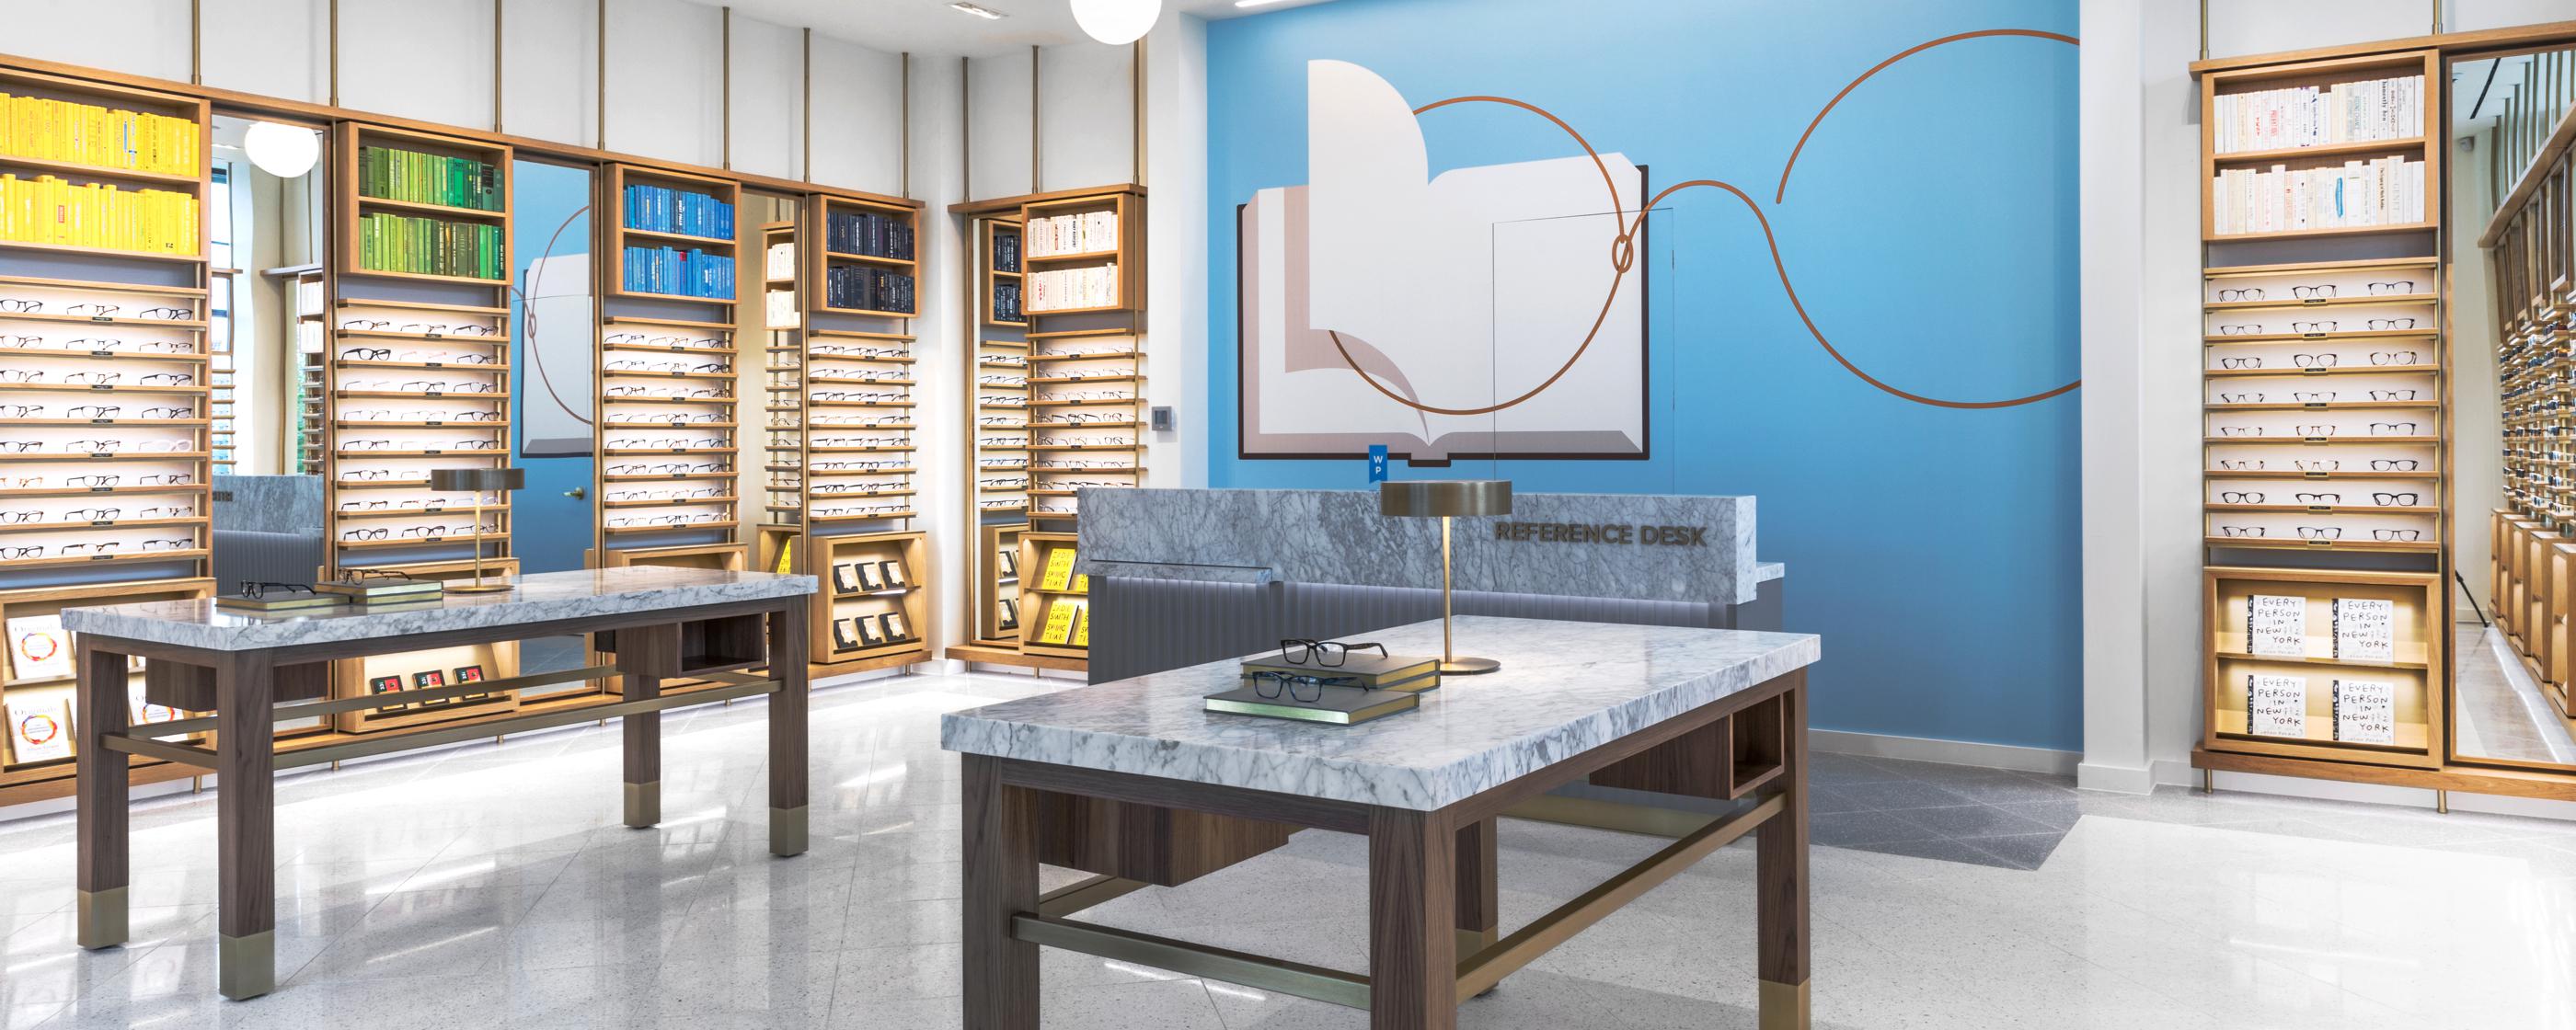 Retail Locations Warby Parker